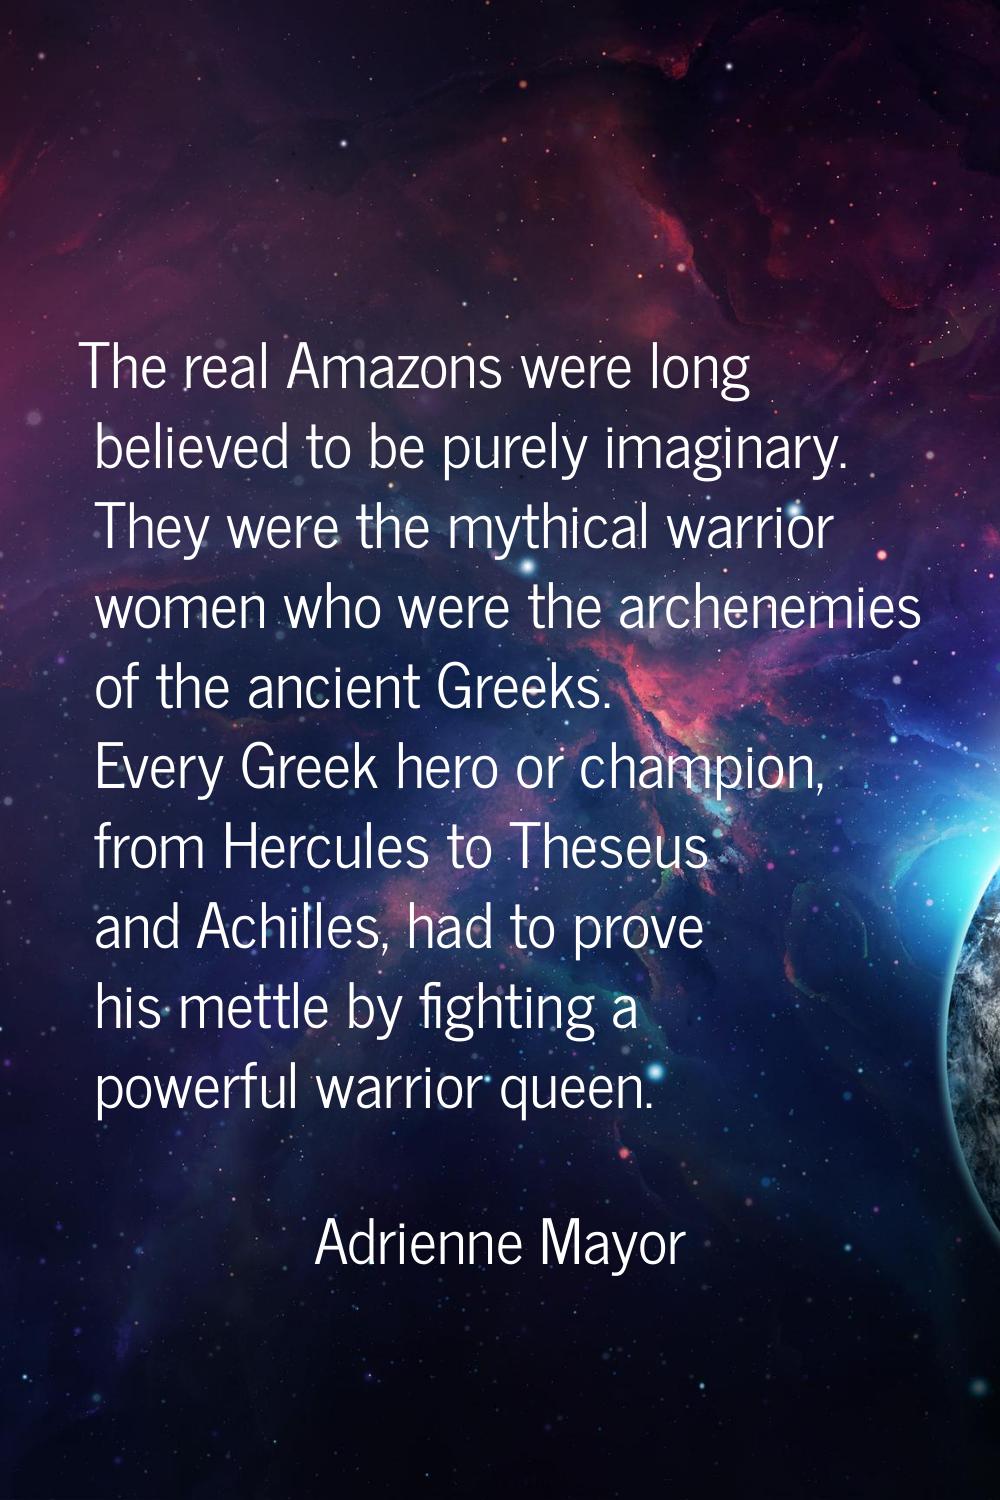 The real Amazons were long believed to be purely imaginary. They were the mythical warrior women wh